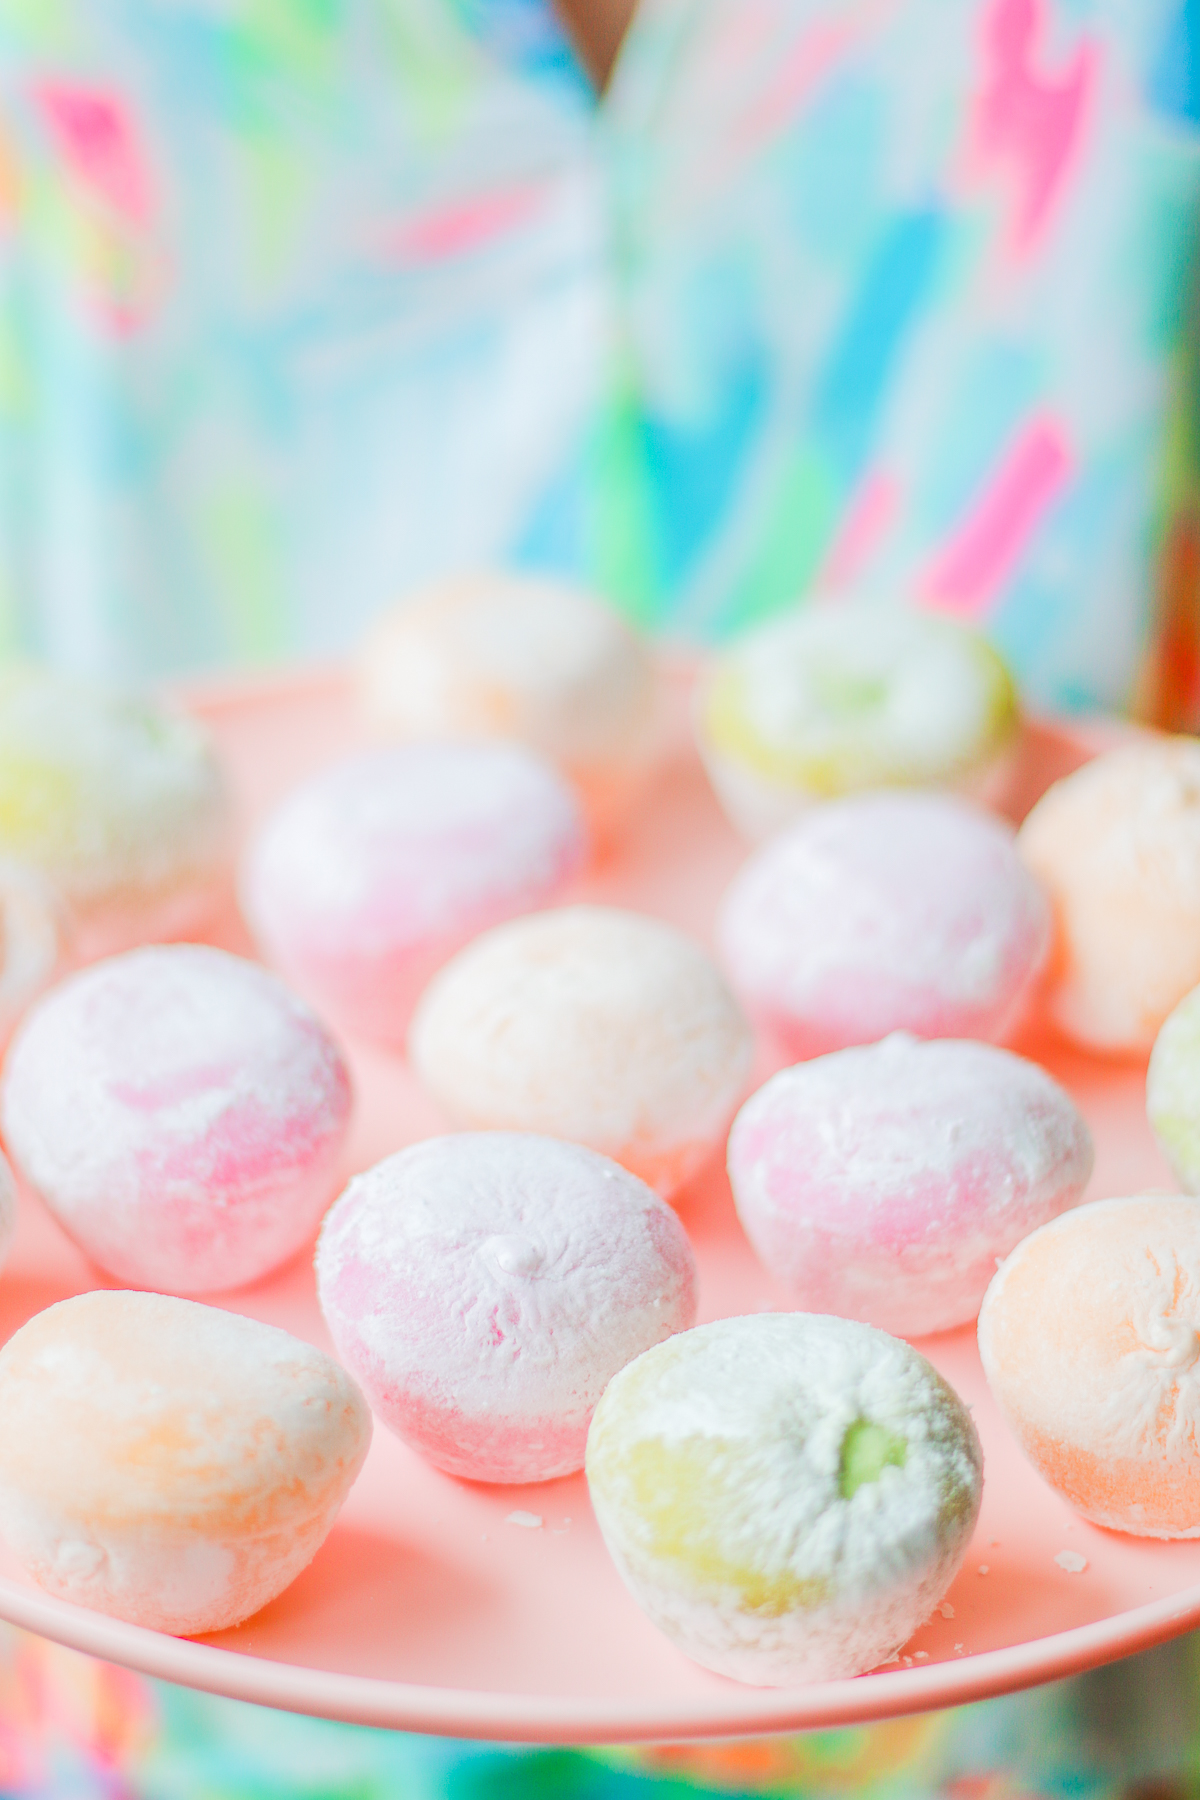 Summer Snacking: Where to Find the Best Mochi (And All the Best Mochi Flavors) by blogger Stephanie Ziajka from Diary of a Debutante, Lilly Pulitzer cold shoulder top with Cult Gaia dupe bag, Levi's 501 jean shorts, and Kendra Scott tassel earrings